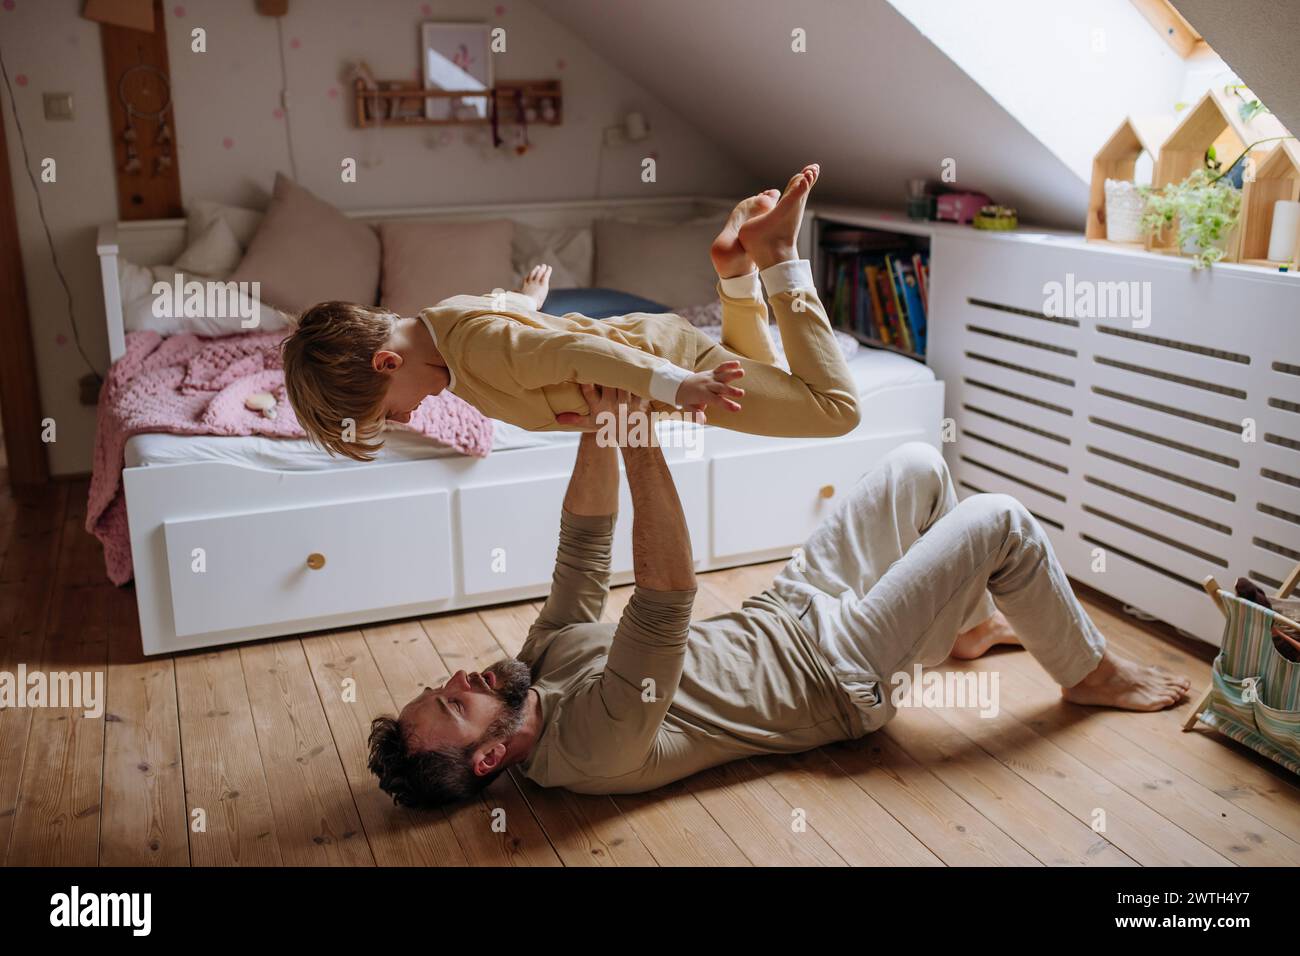 Father an son doing ariplane game, lifting boy up with hands like plane, laughing together. Boys dad. Unconditional paternal love, Father's Day Stock Photo